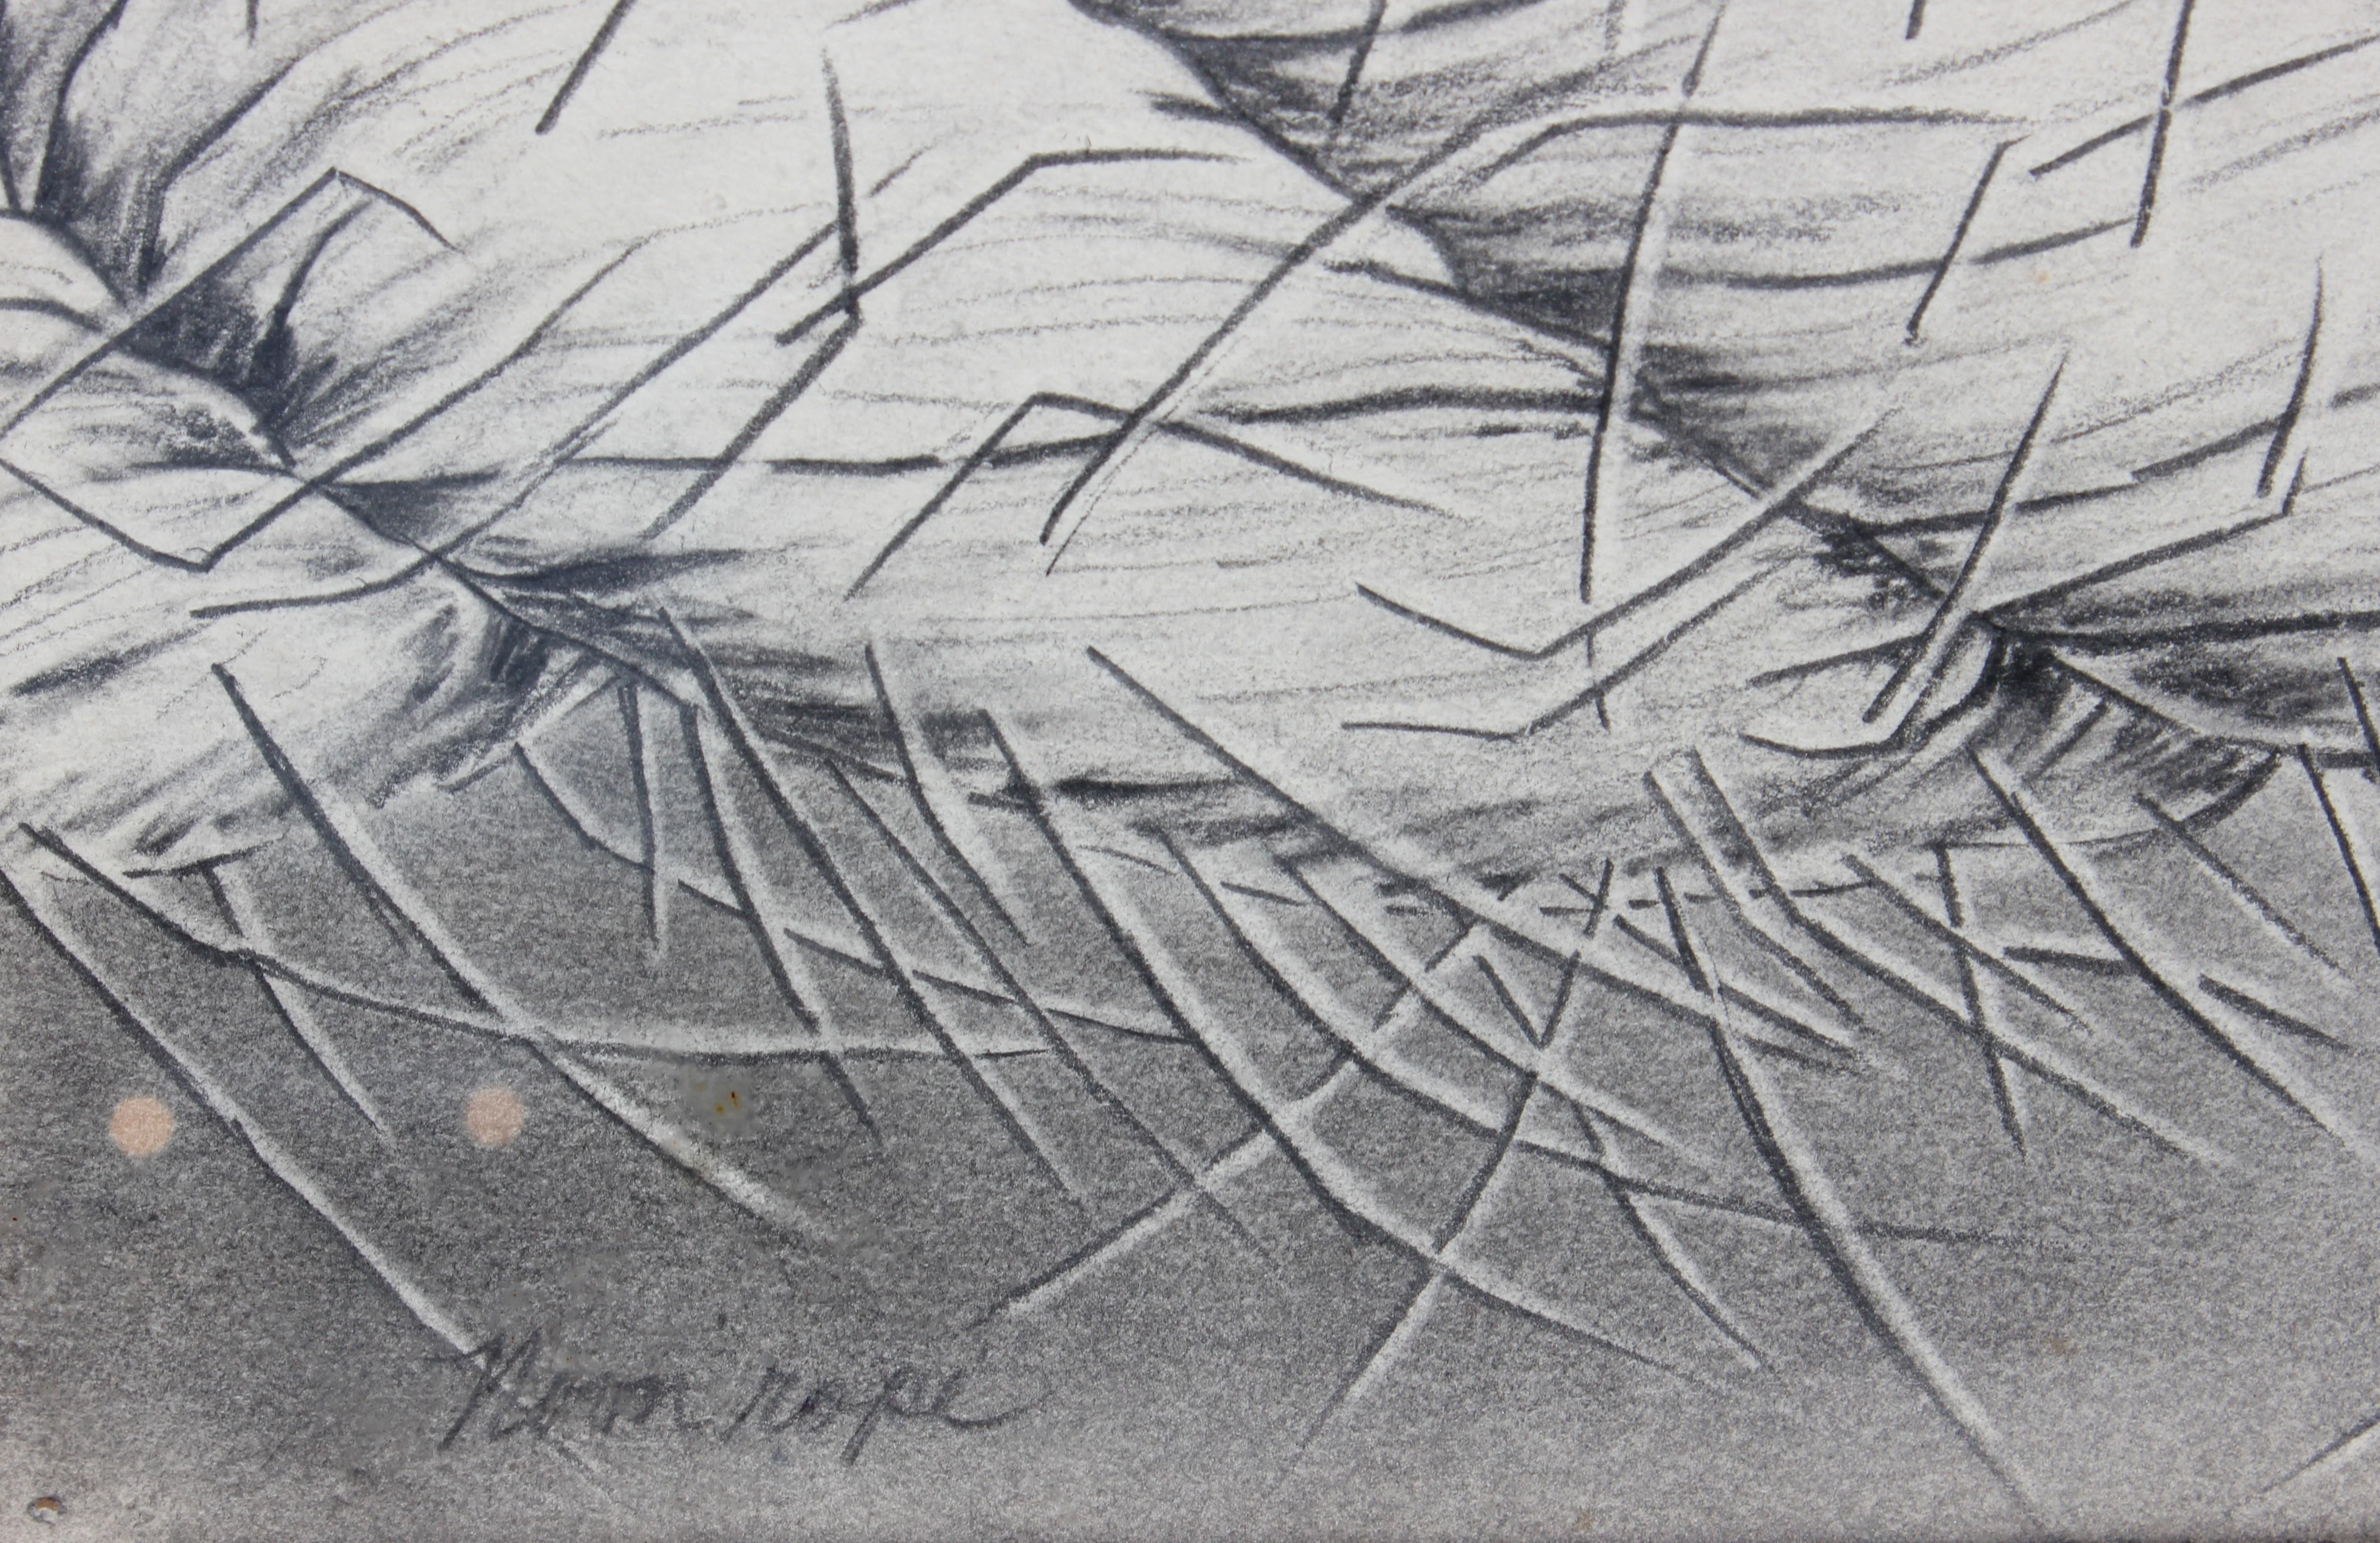 Graphite sketch of a detailed view of a rope. Titled by the artist and signed in the bottom right and left corners. Date of completion, February, 1993.
Dimensions without Frame: H 9 in. x W 11.5 in.

Artist Biography: Patricia Jane St. John Danko